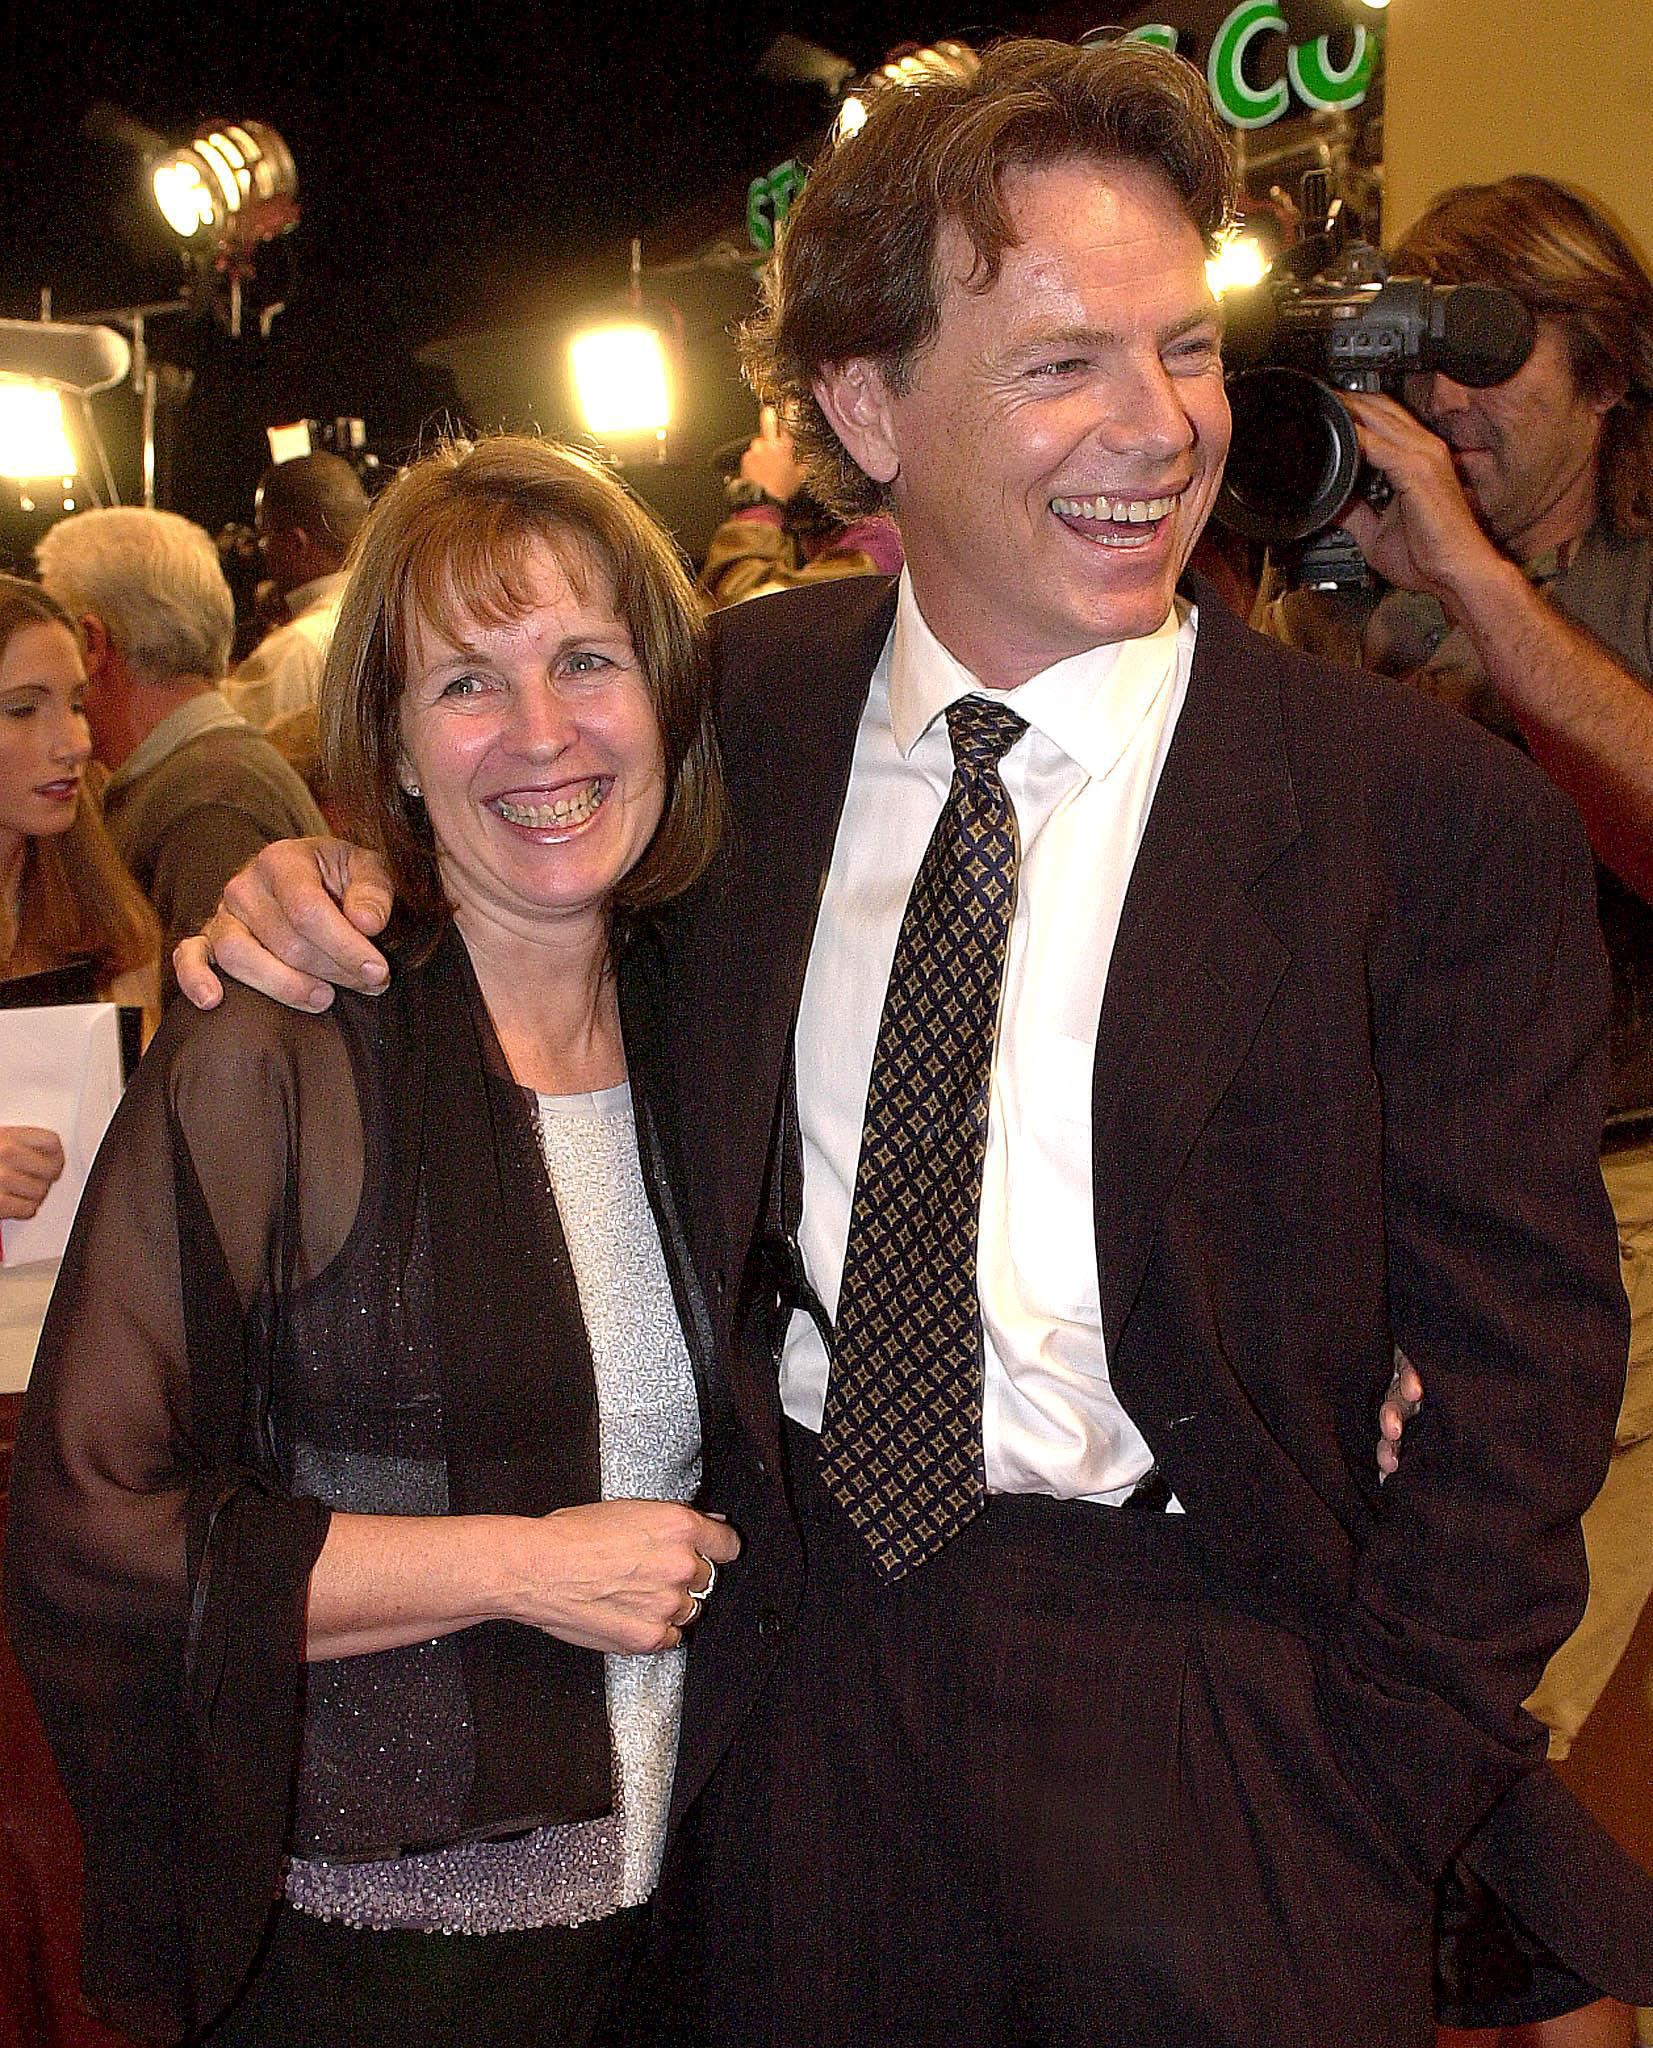 Susan Devlin and Bruce Greenwood at the premiere of "Thirteen Days" on December 19, 2000, in Los Angeles. | Source: Getty Images